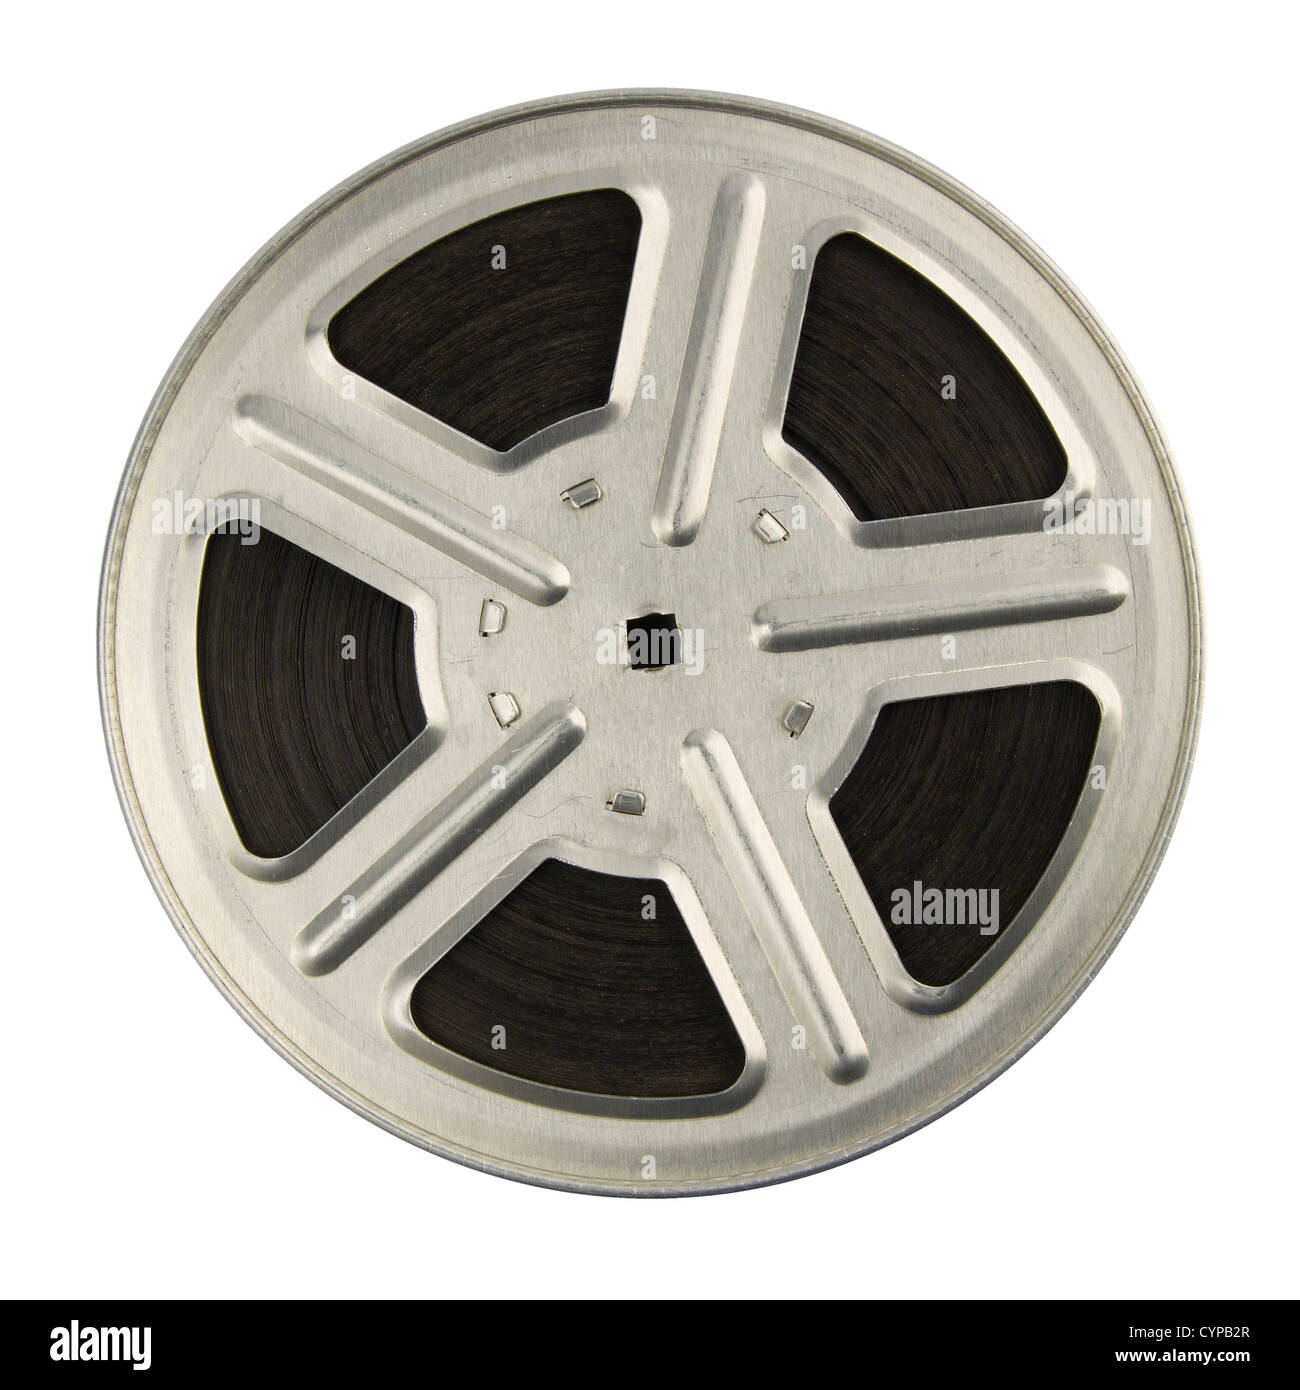 16 mm motion picture film reel, isolated on white background Stock Photo